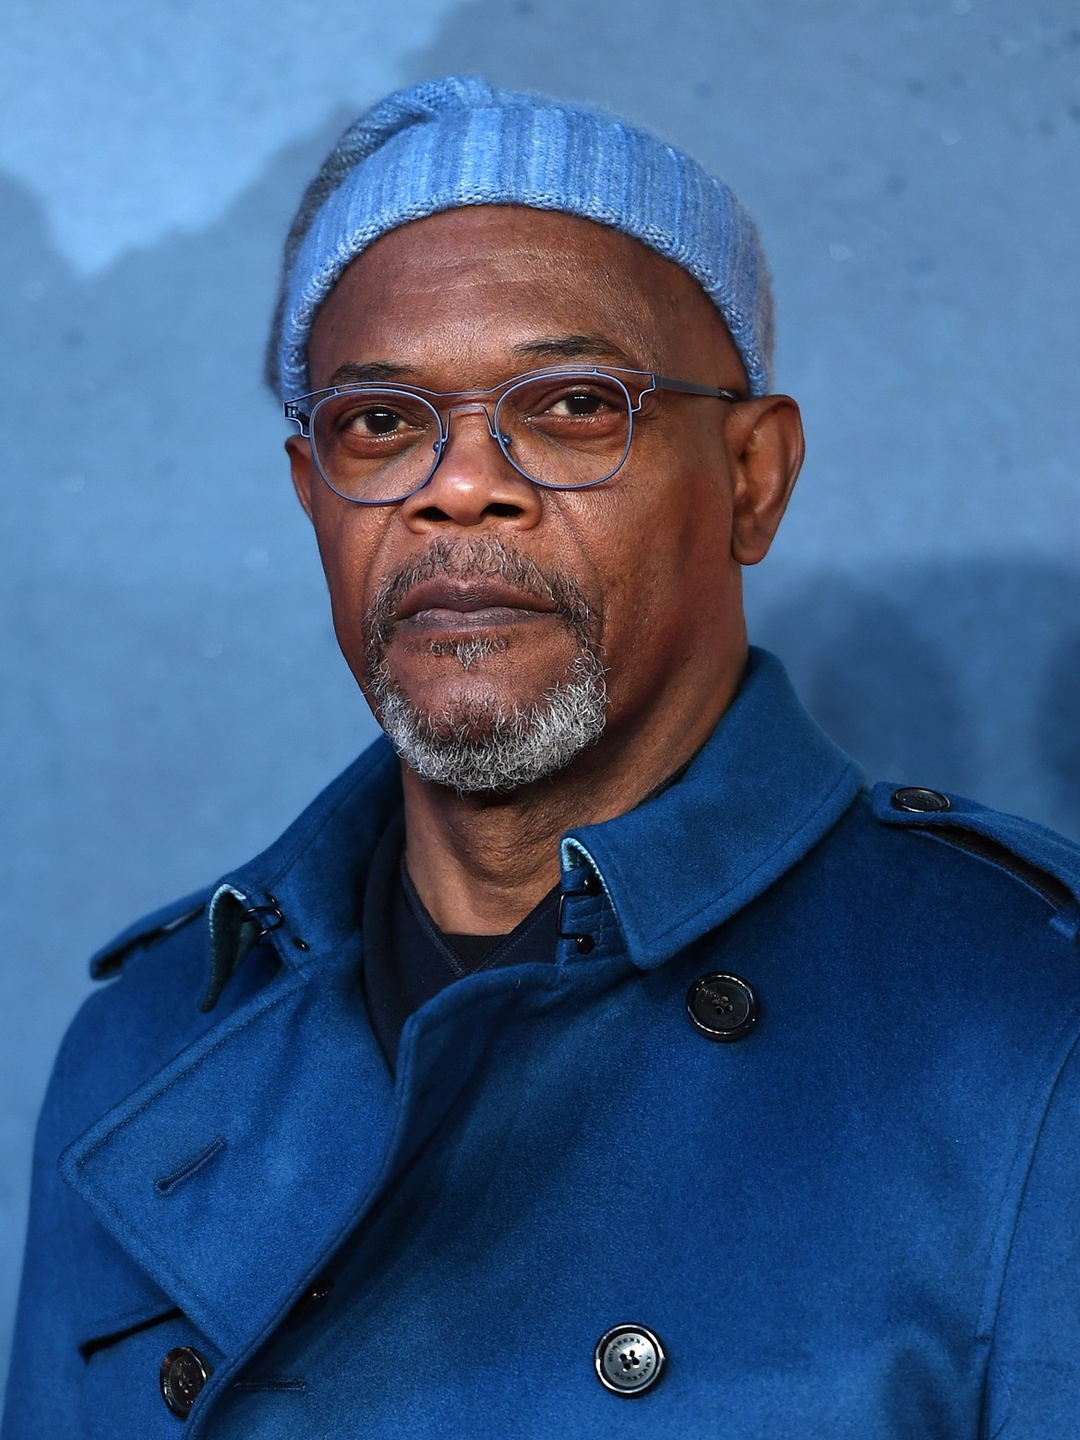 Samuel L. Jackson how did he became famous